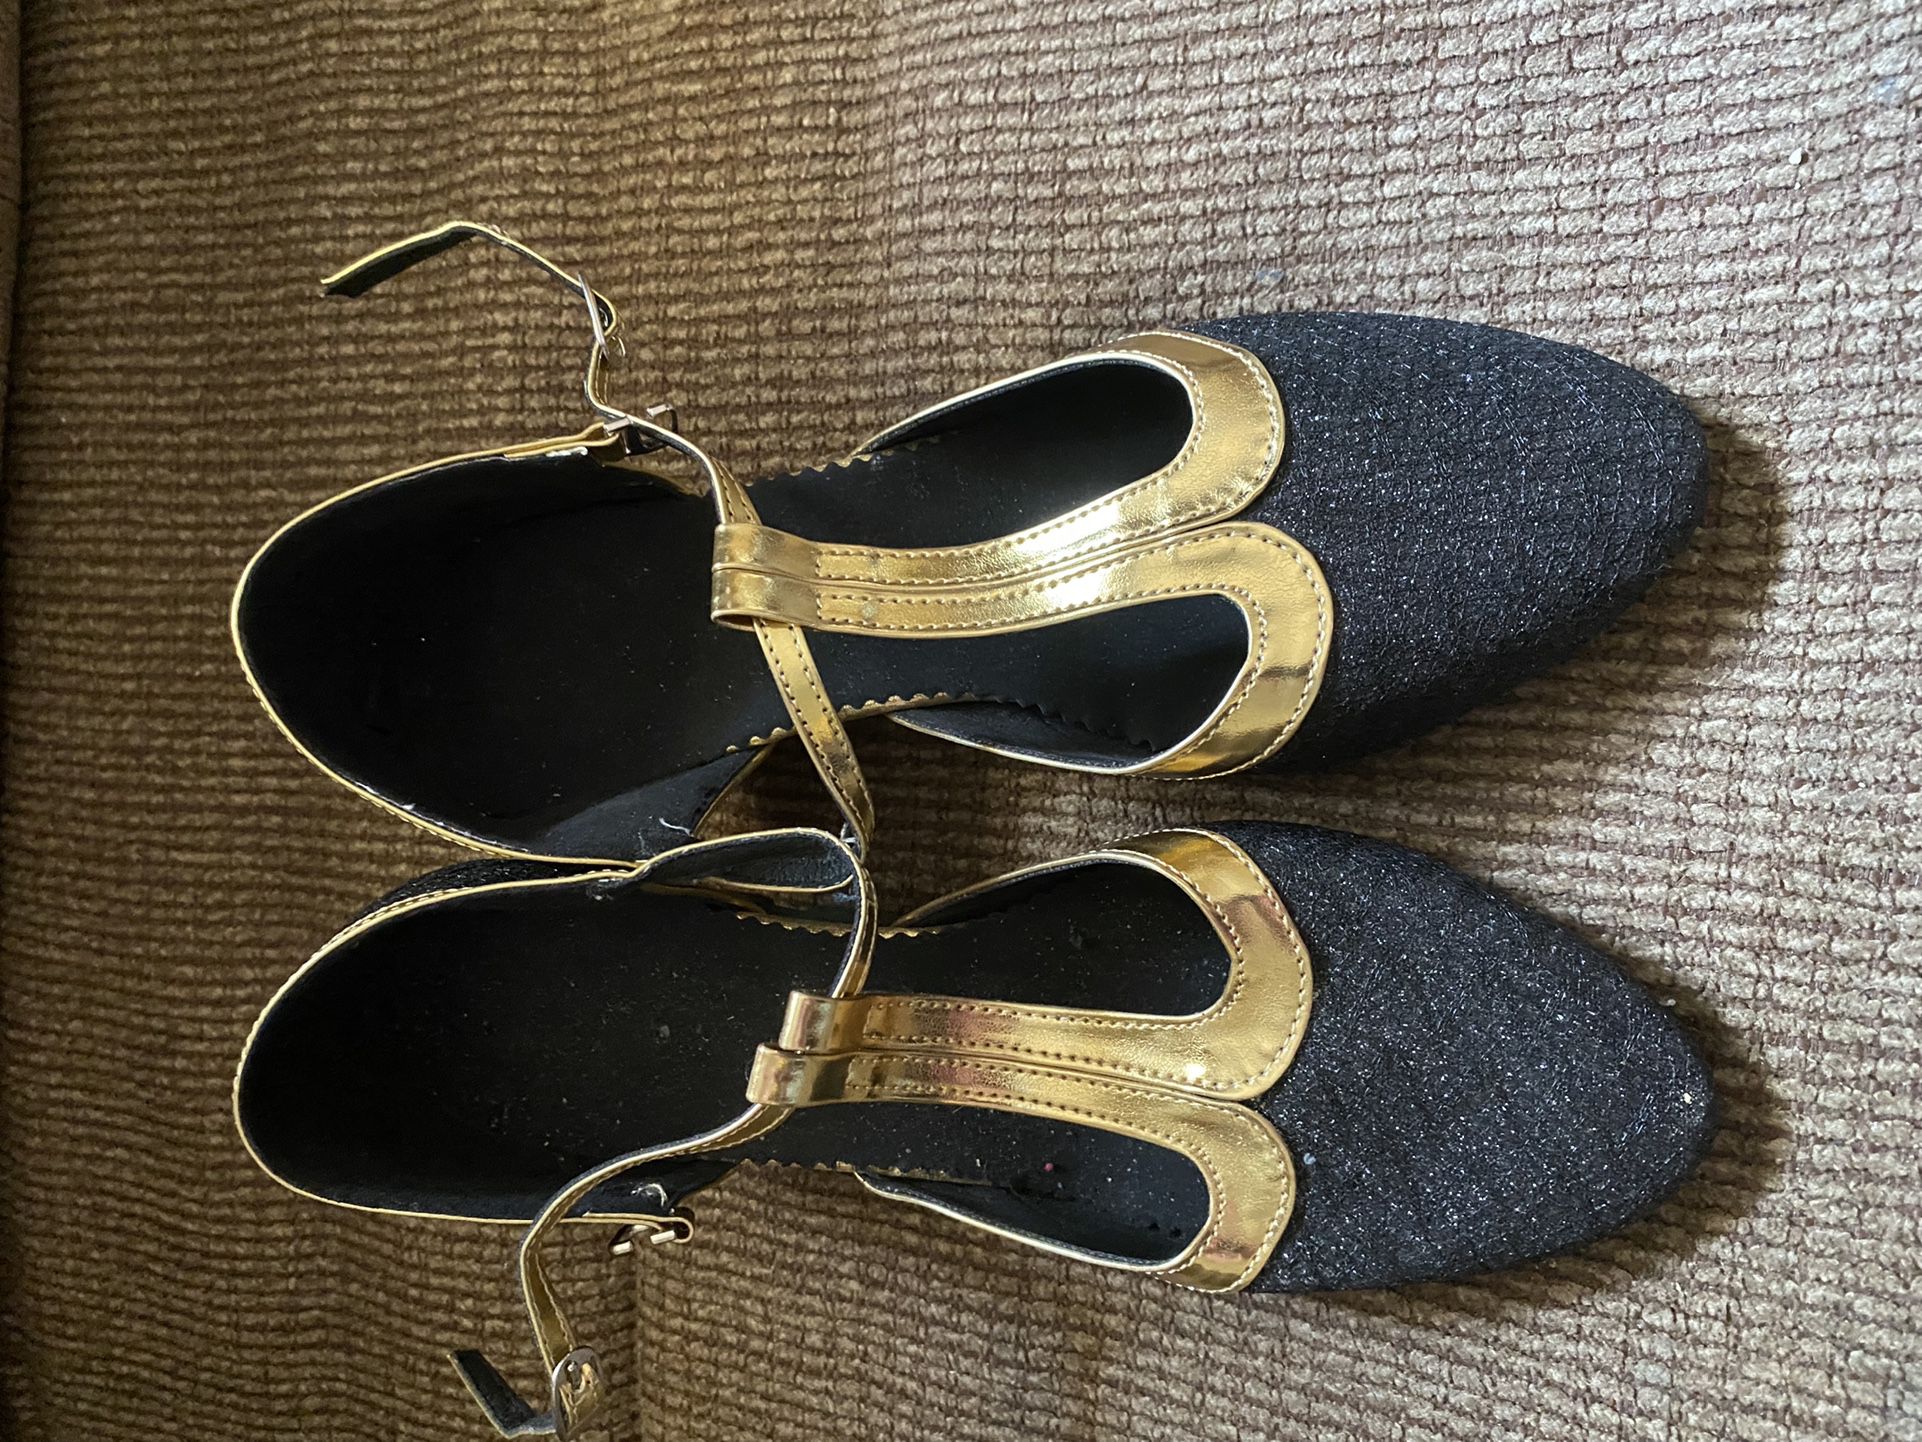 Unknown Brand Gold And Black Glitter Mid Heel Dress Shoes Size 38 Or 6  $5.00